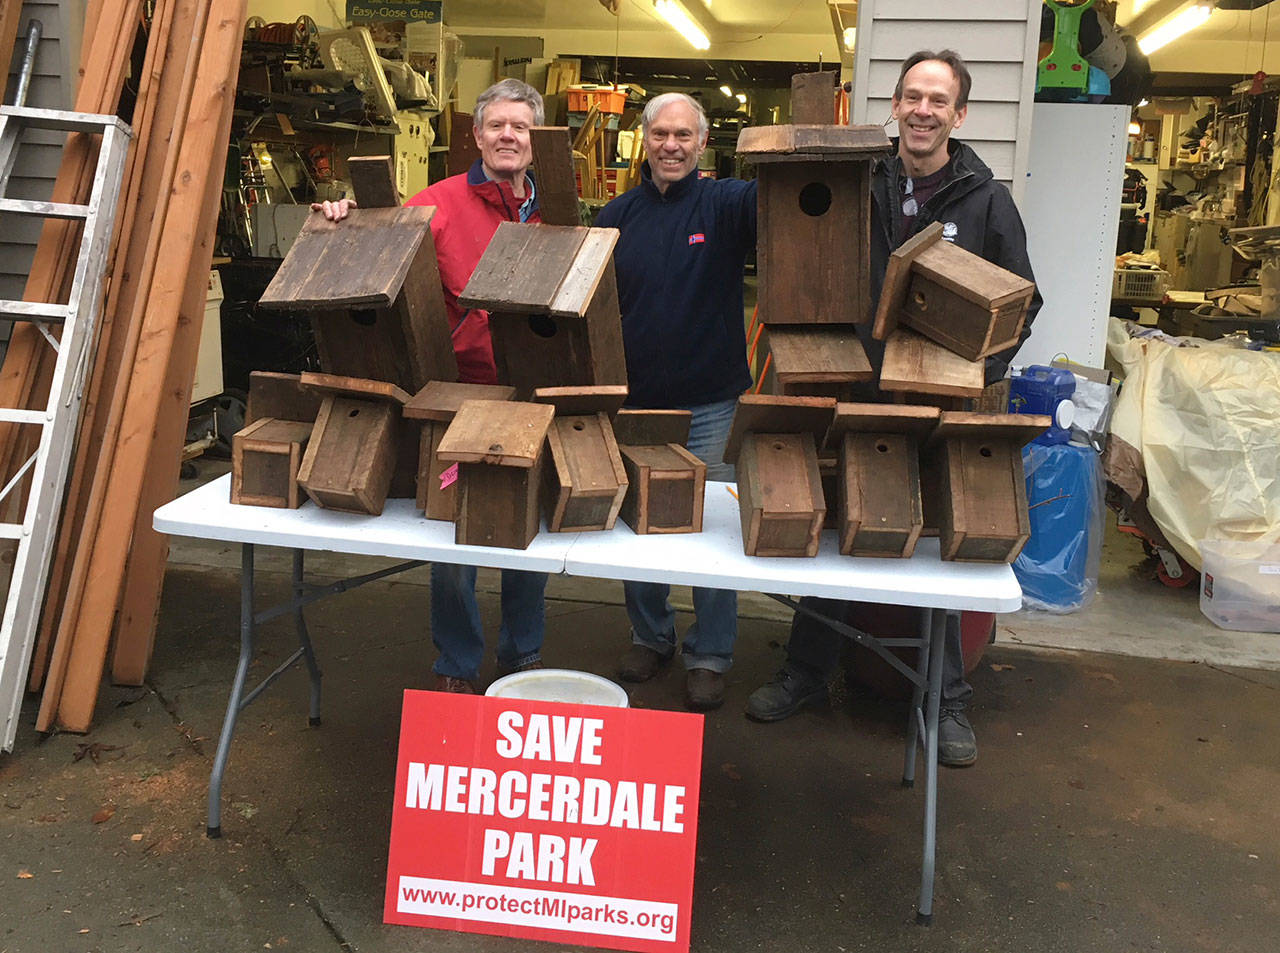 Members of Concerned Citizens for Mercer Island Parks with 21 birdhouses built out of recycled cedar, which will be mounted in the newly refurbished Native Garden in Mercerdale Park. Photo courtesy of Linda Anchondo